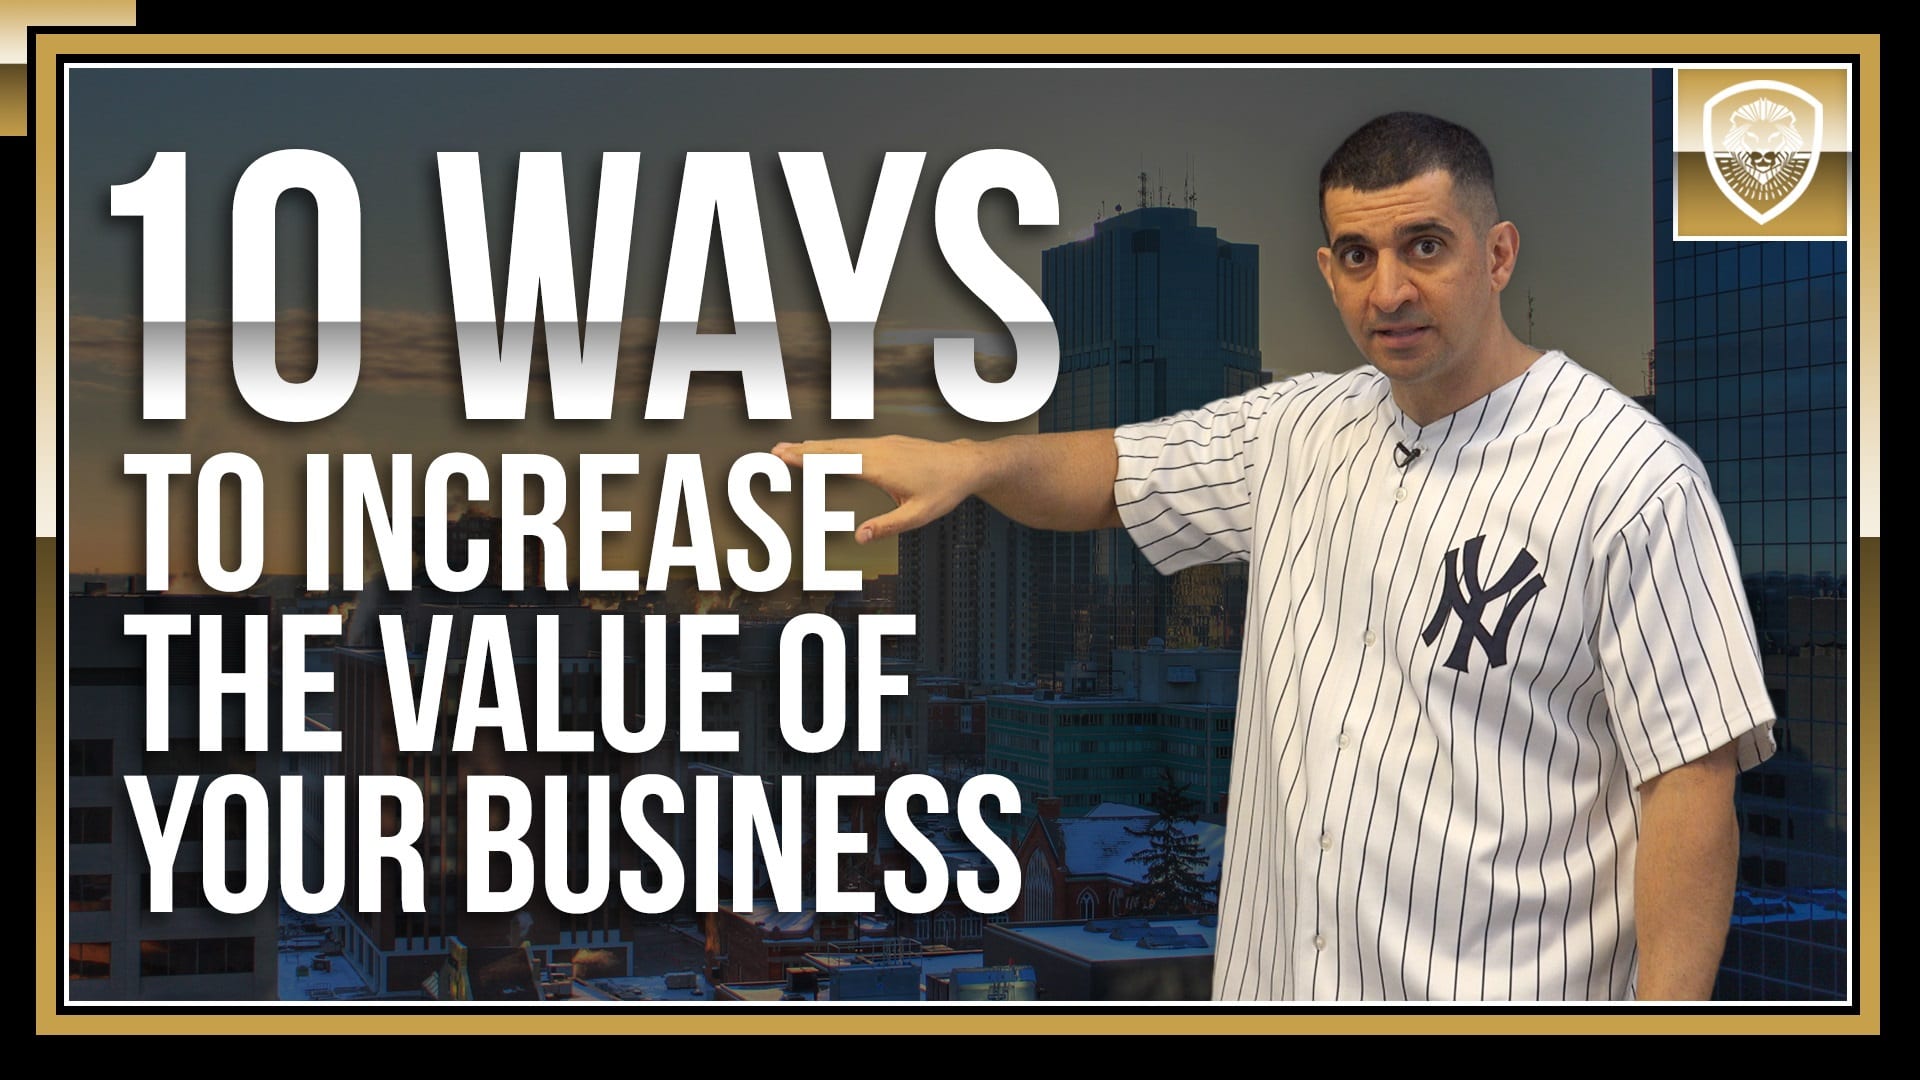 Do you focus more on profits or the value of your business? Check out these 10 ways to increase the value of your business